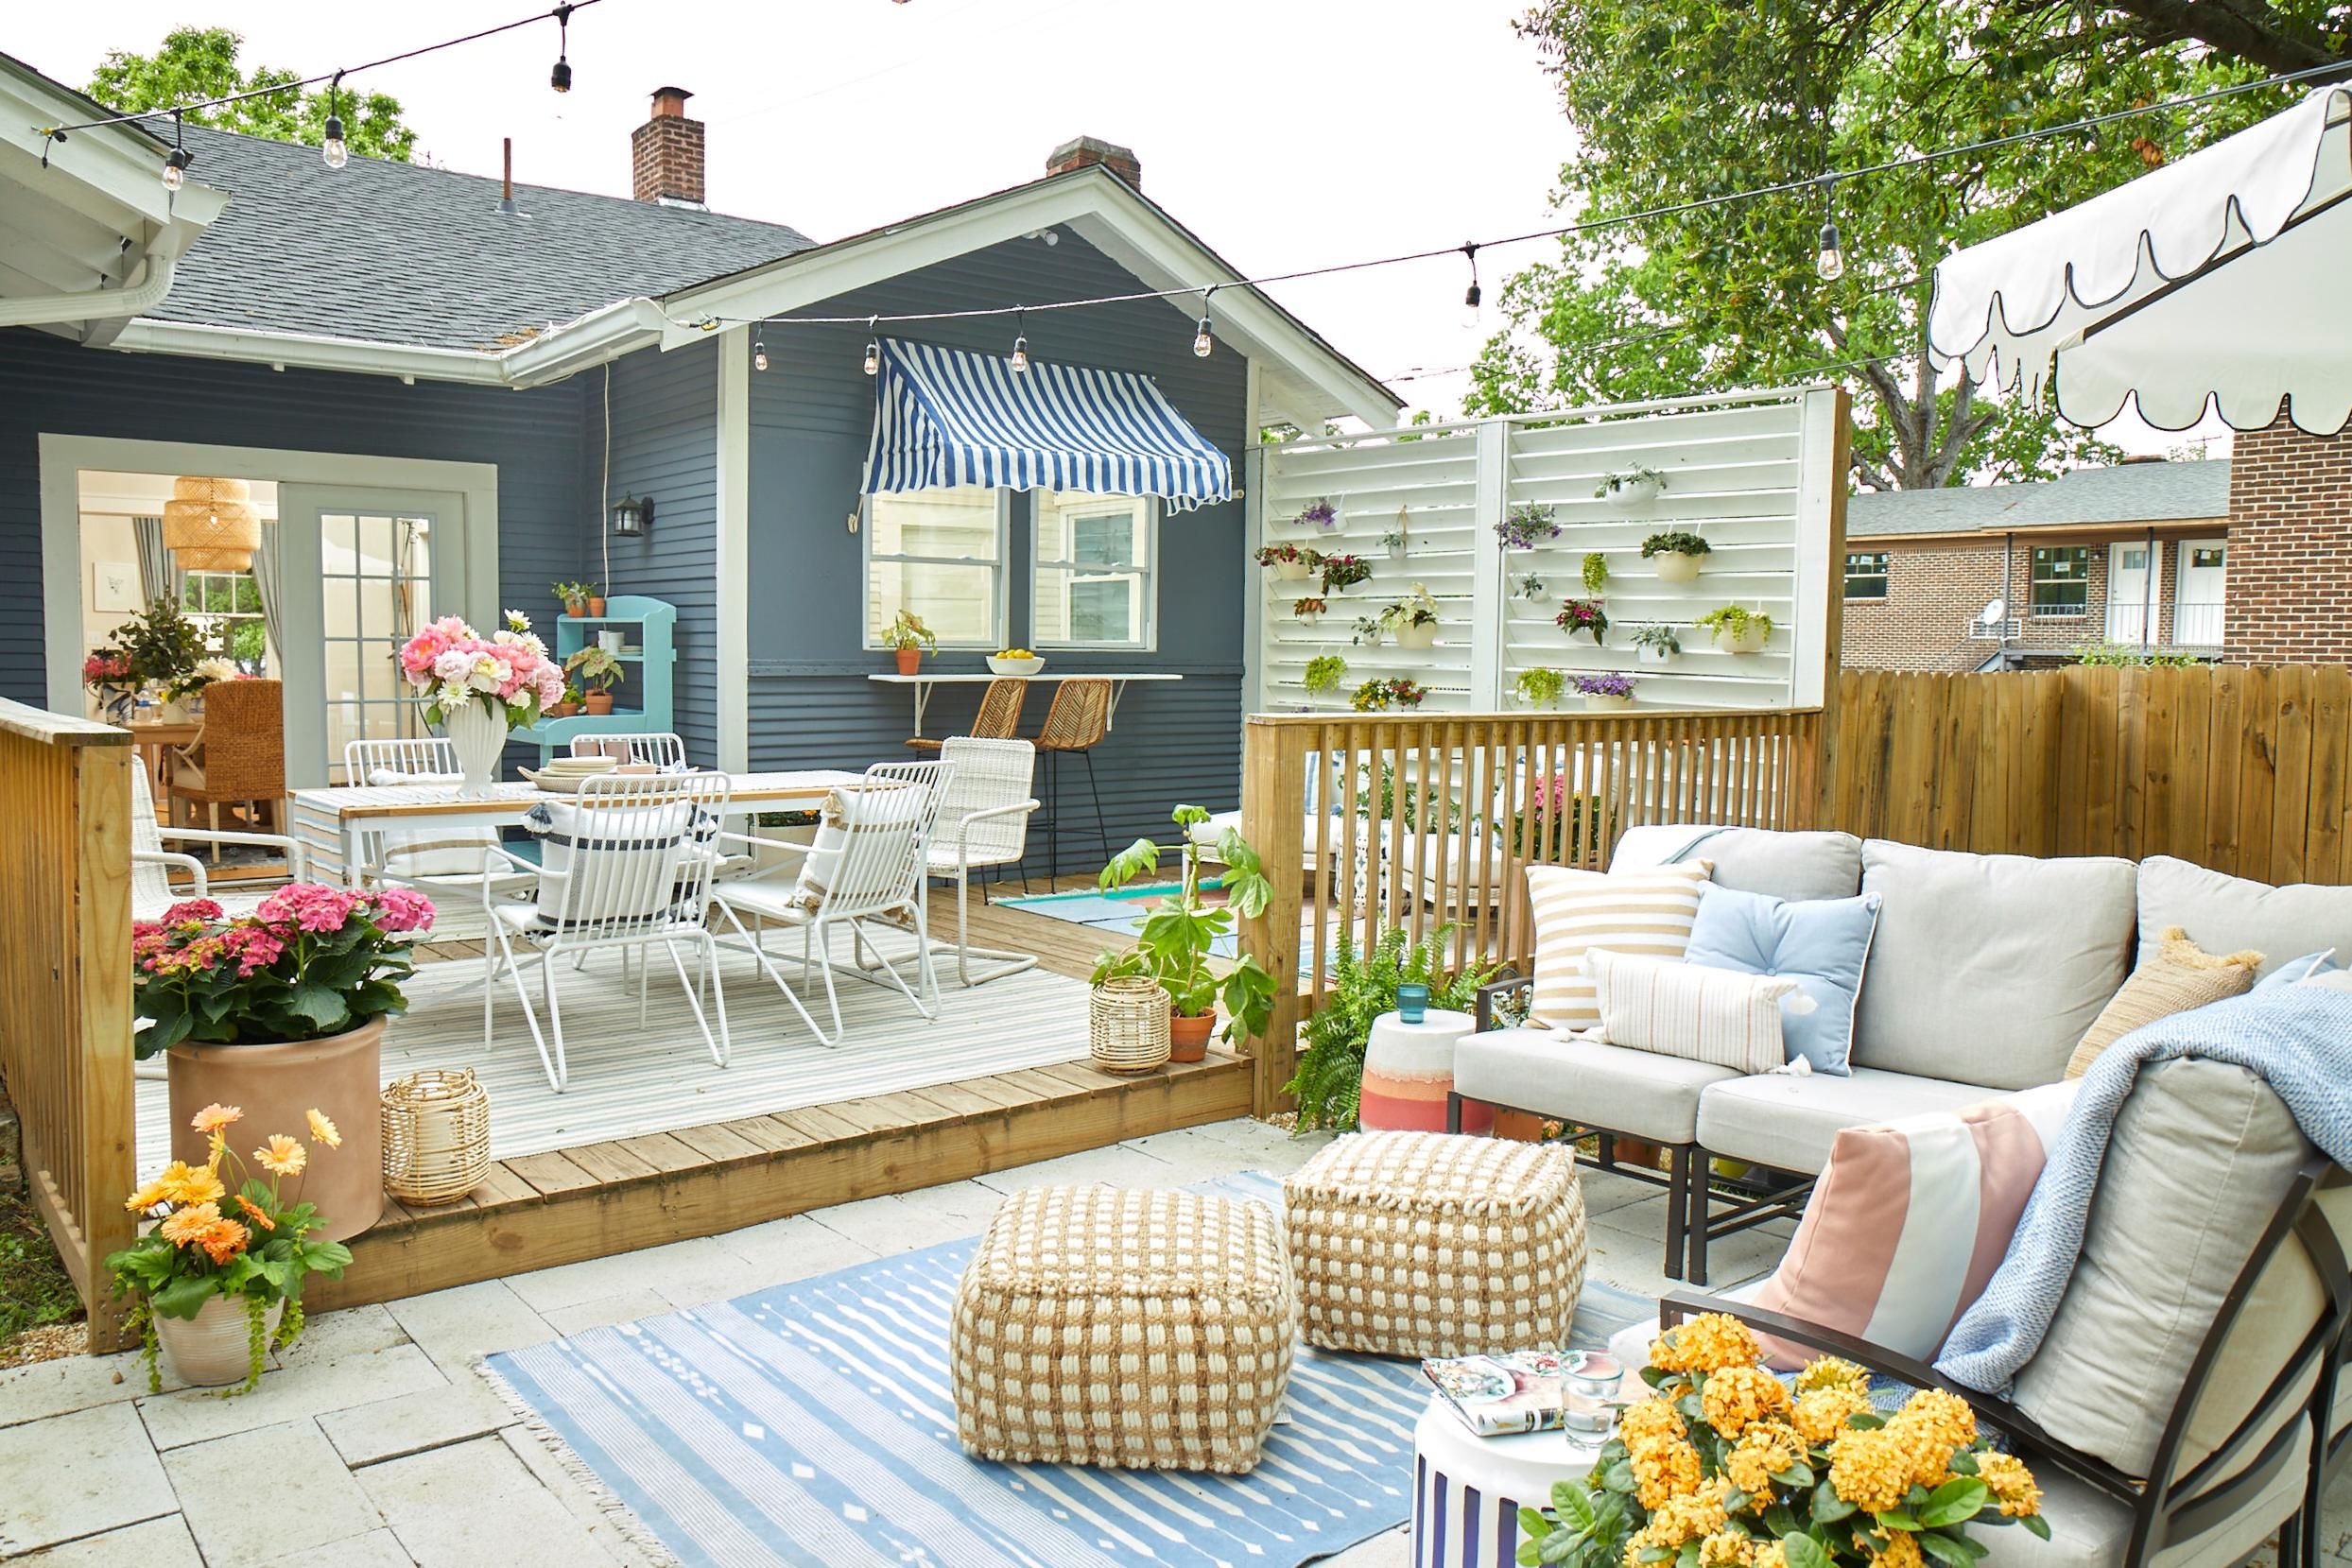 41 Best Patio And Porch Design Ideas Decorating Your Outdoor Space